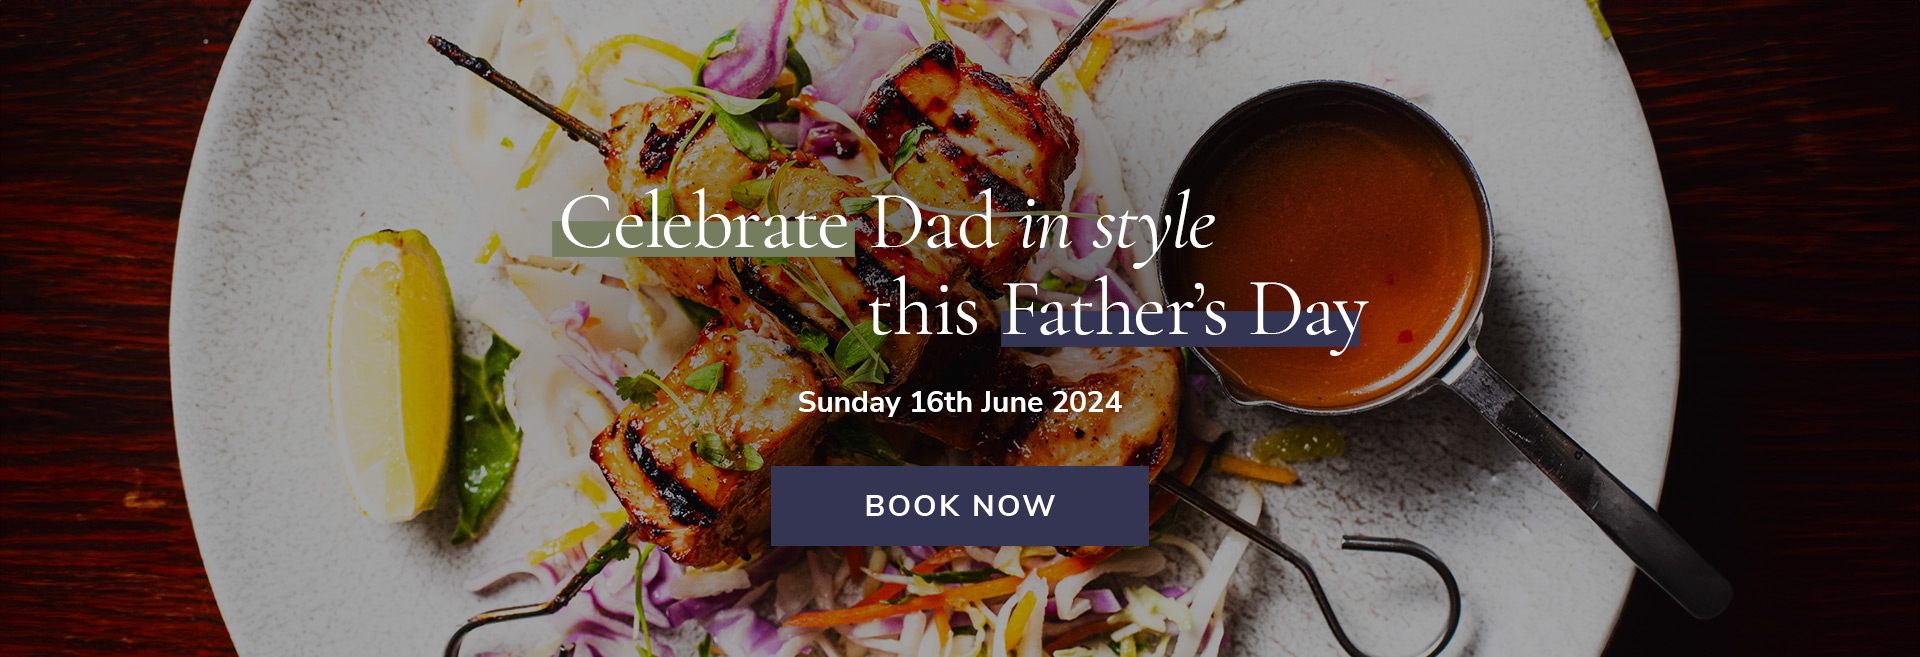 Father's Day at The Builder's Arms